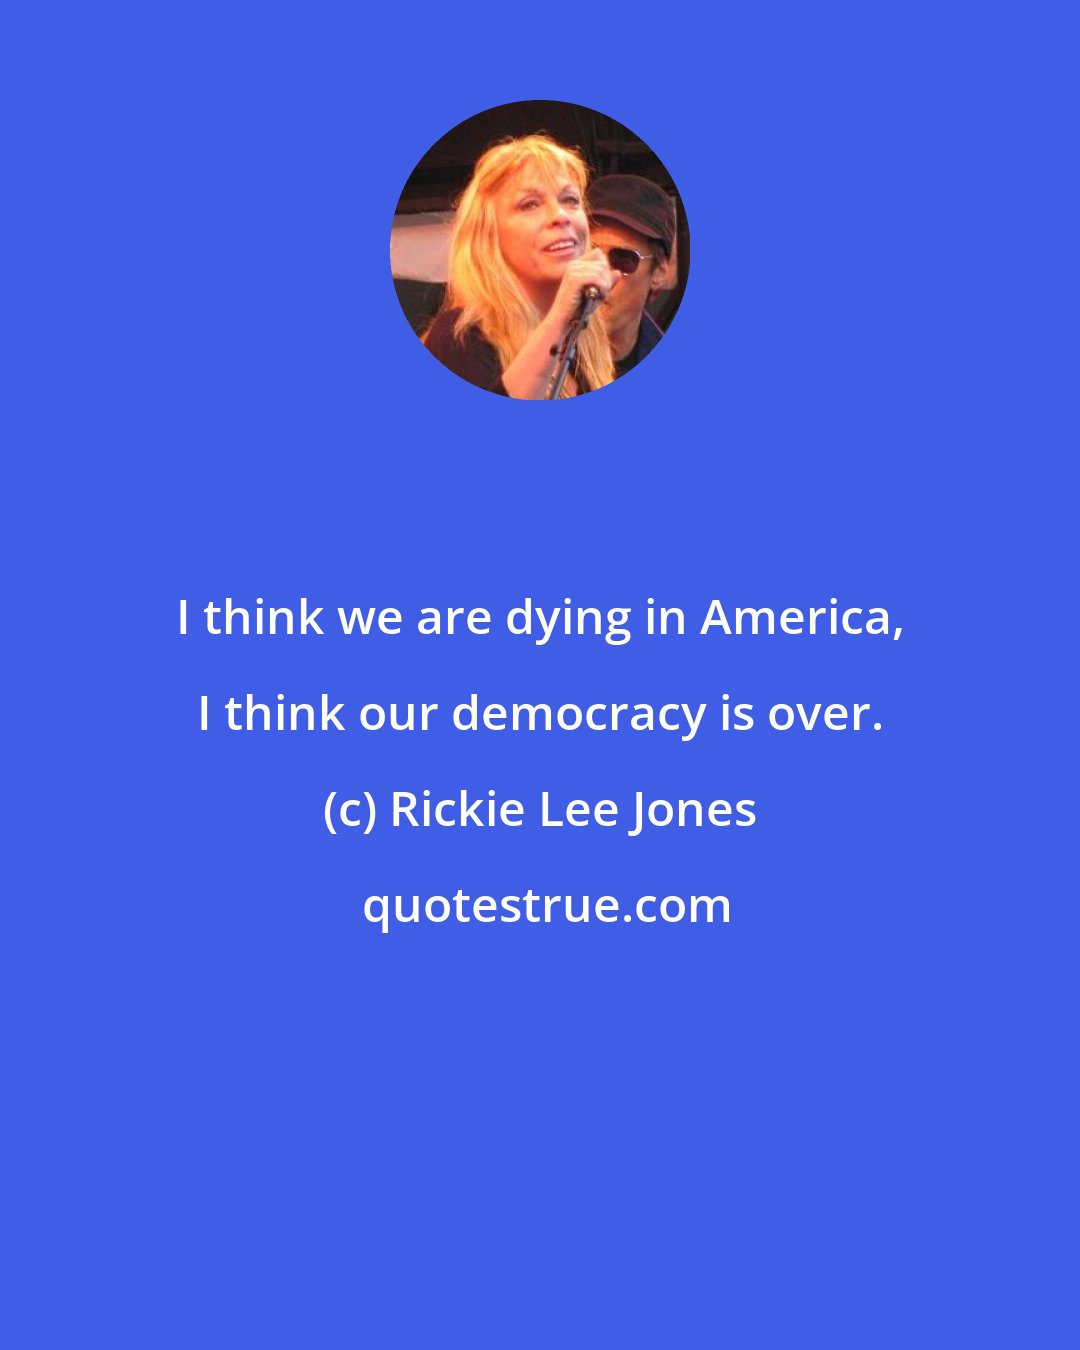 Rickie Lee Jones: I think we are dying in America, I think our democracy is over.